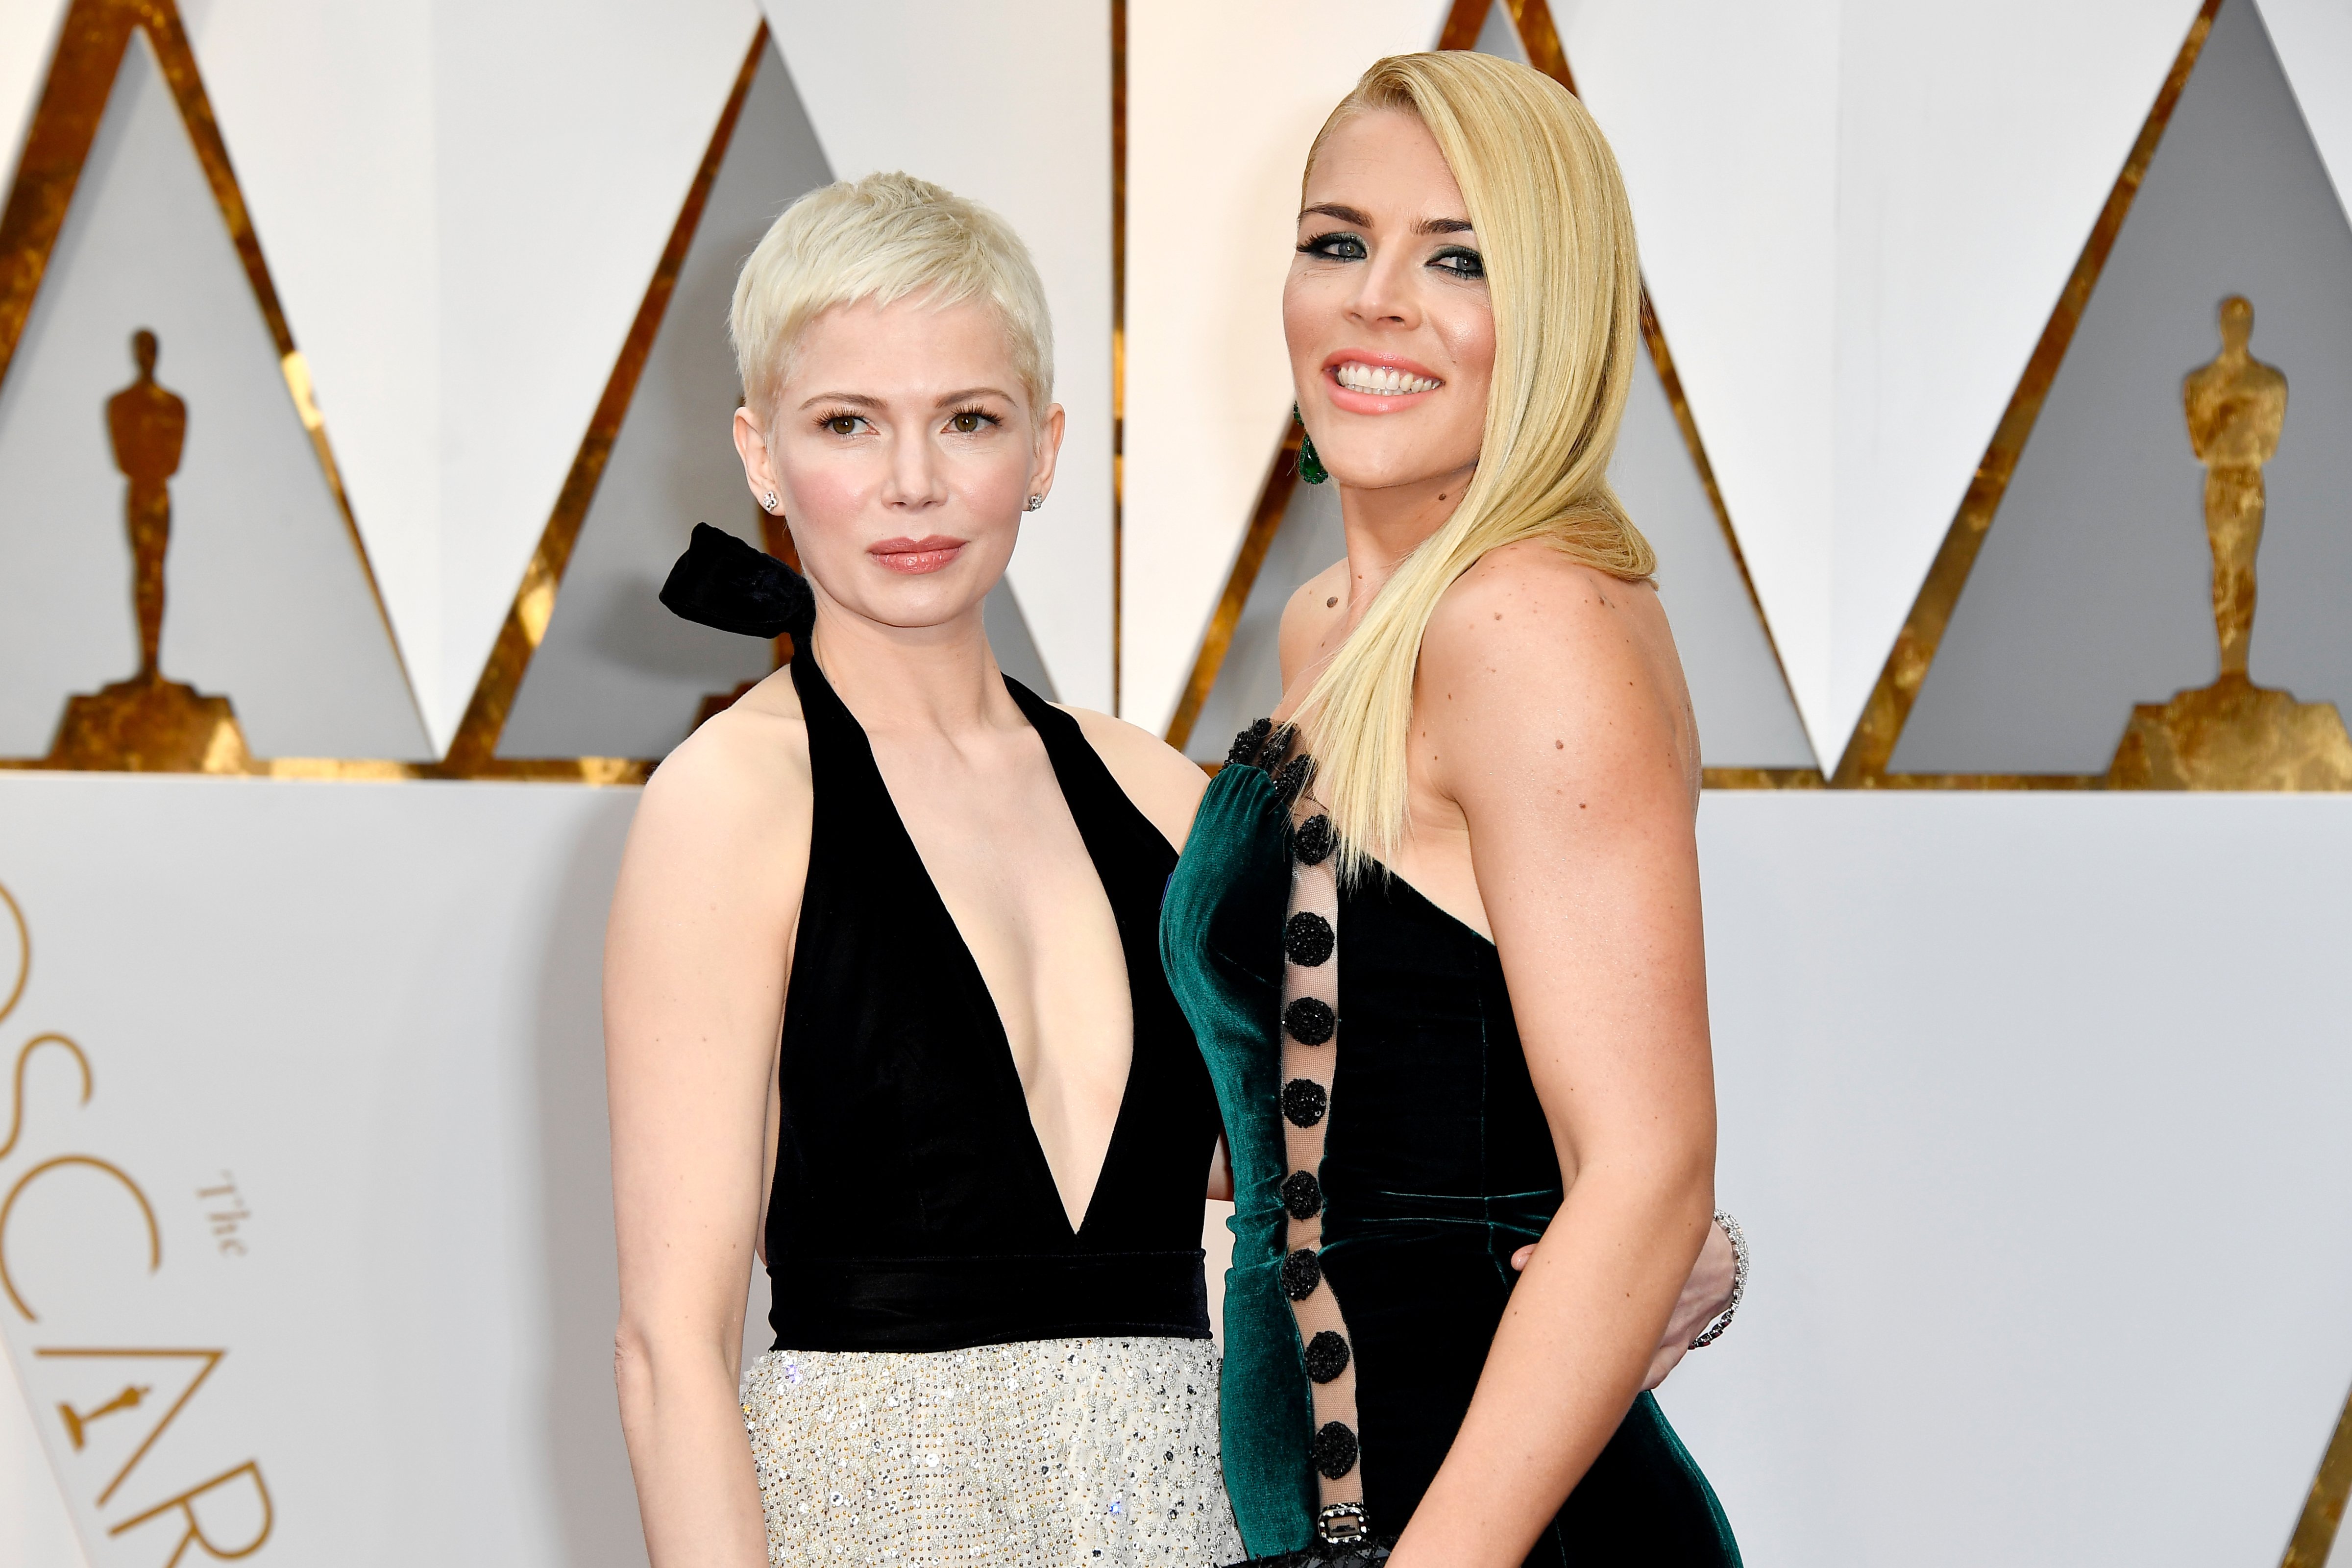 HOLLYWOOD, CA - FEBRUARY 26:  Actors Michelle Williams (L) and Busy Philipps attend the 89th Annual Academy Awards at Hollywood &amp; Highland Center on February 26, 2017 in Hollywood, California.  (Photo by Frazer Harrison/Getty Images) (Frazer Harrison&mdash;Getty Images)